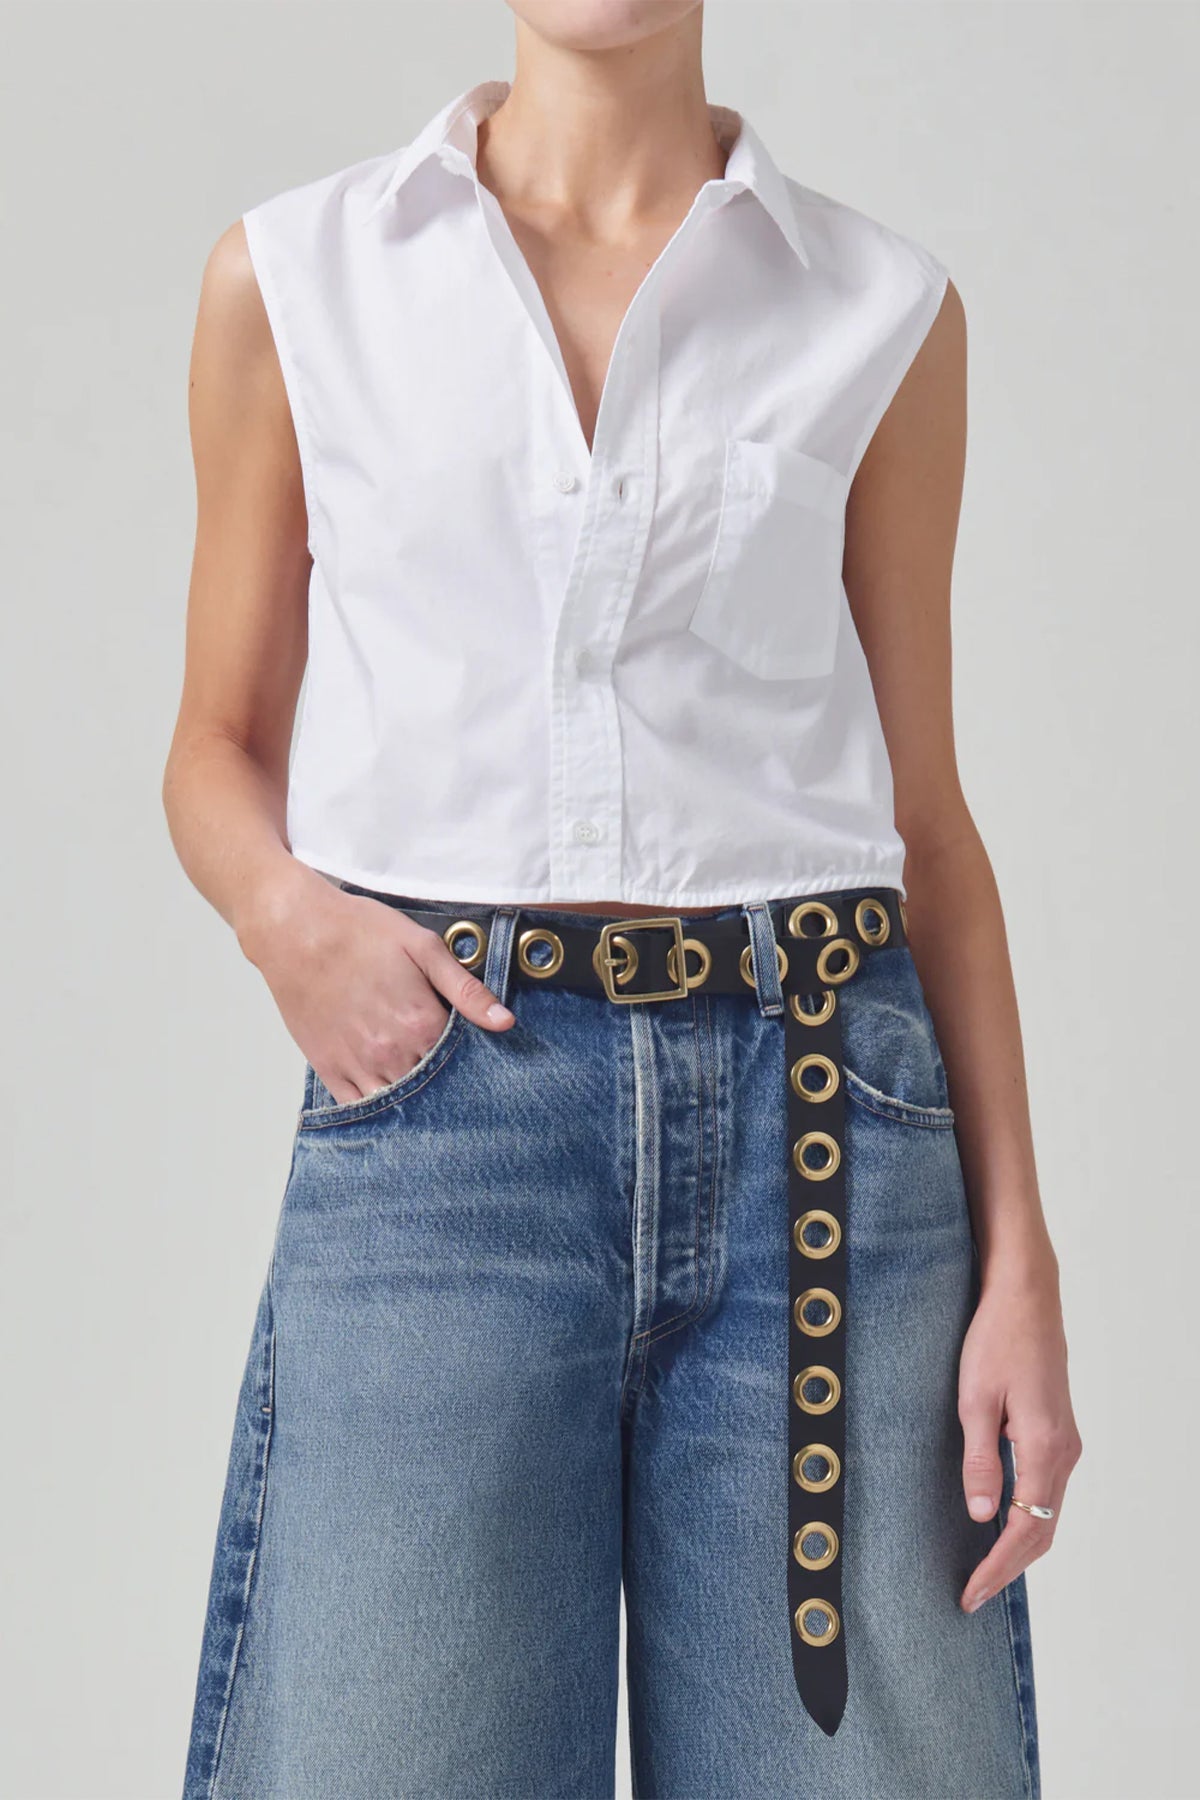 Anders Sleeveless Crop in White - shop - olivia.com